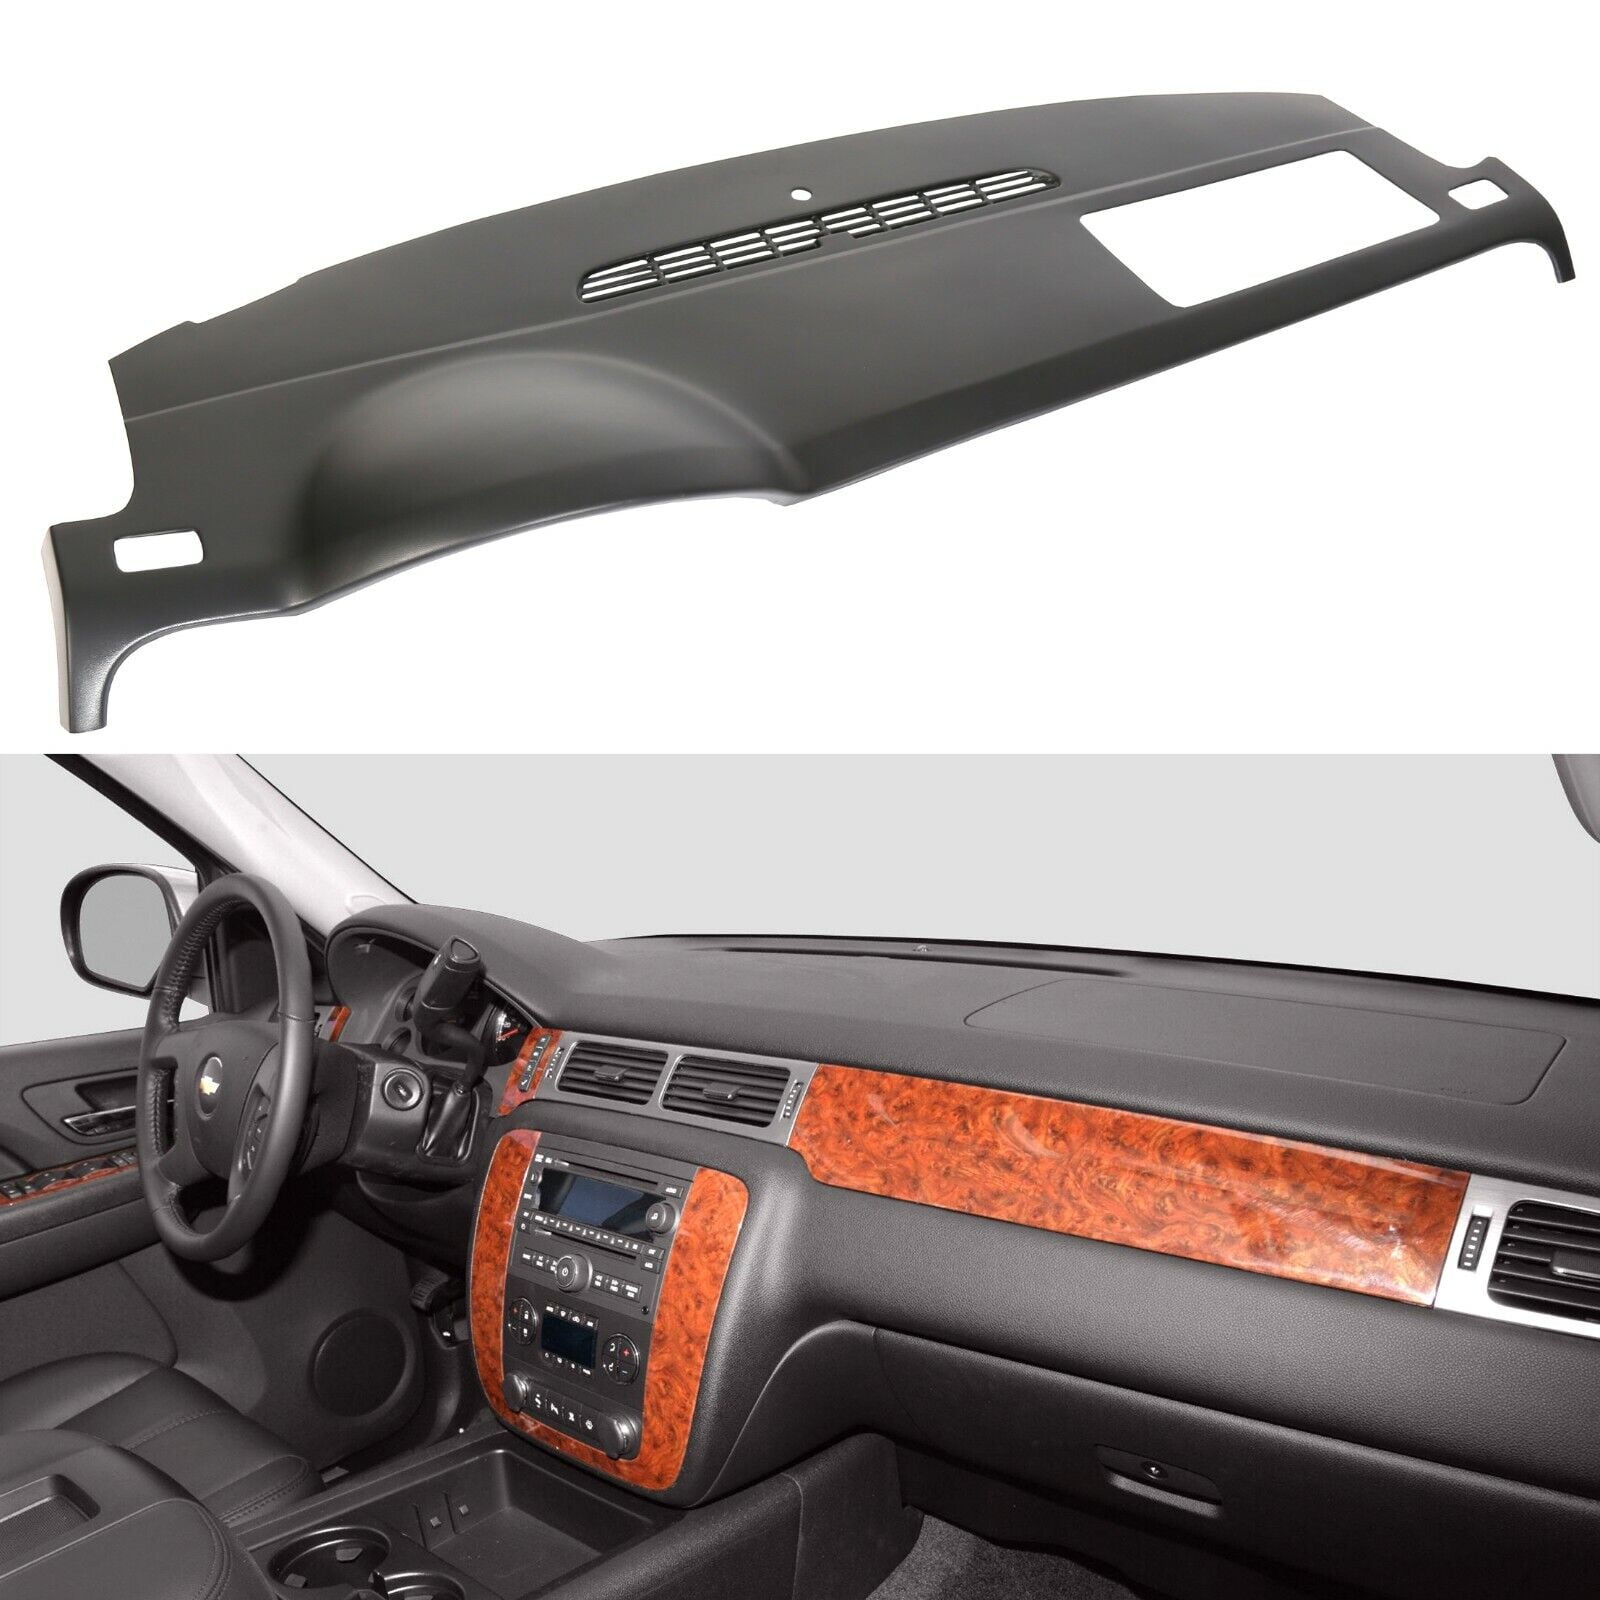 Coverlay® Dash Cover 18-207 Comparison to Imported Dash Cover. 